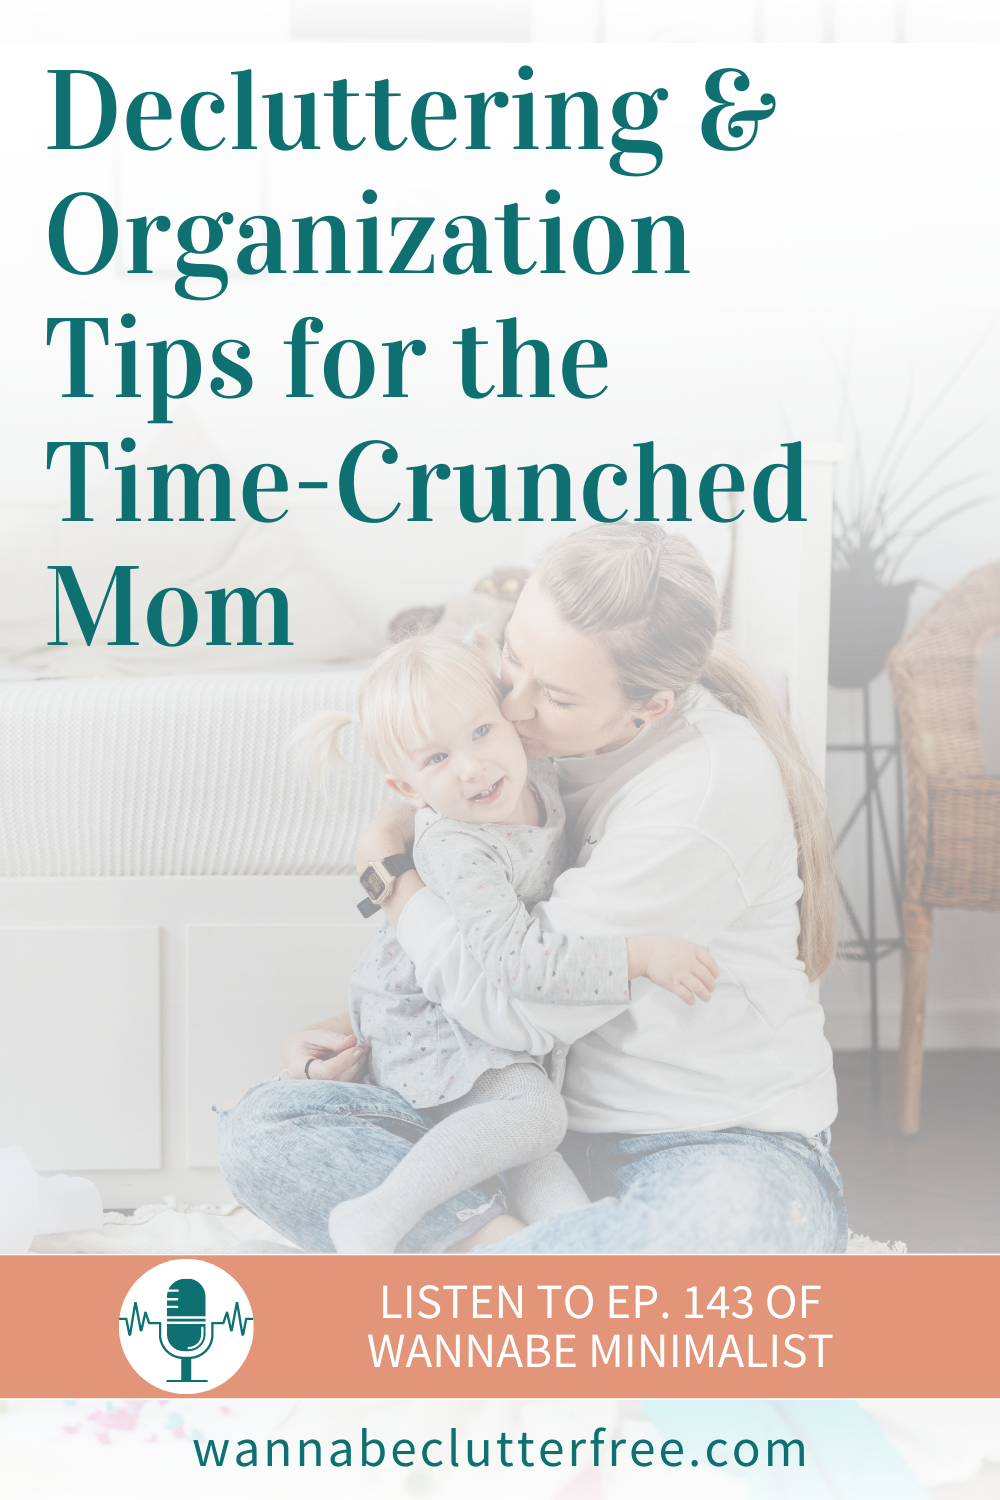 Decluttering and Organization Tips for theTime-Crunched Mom